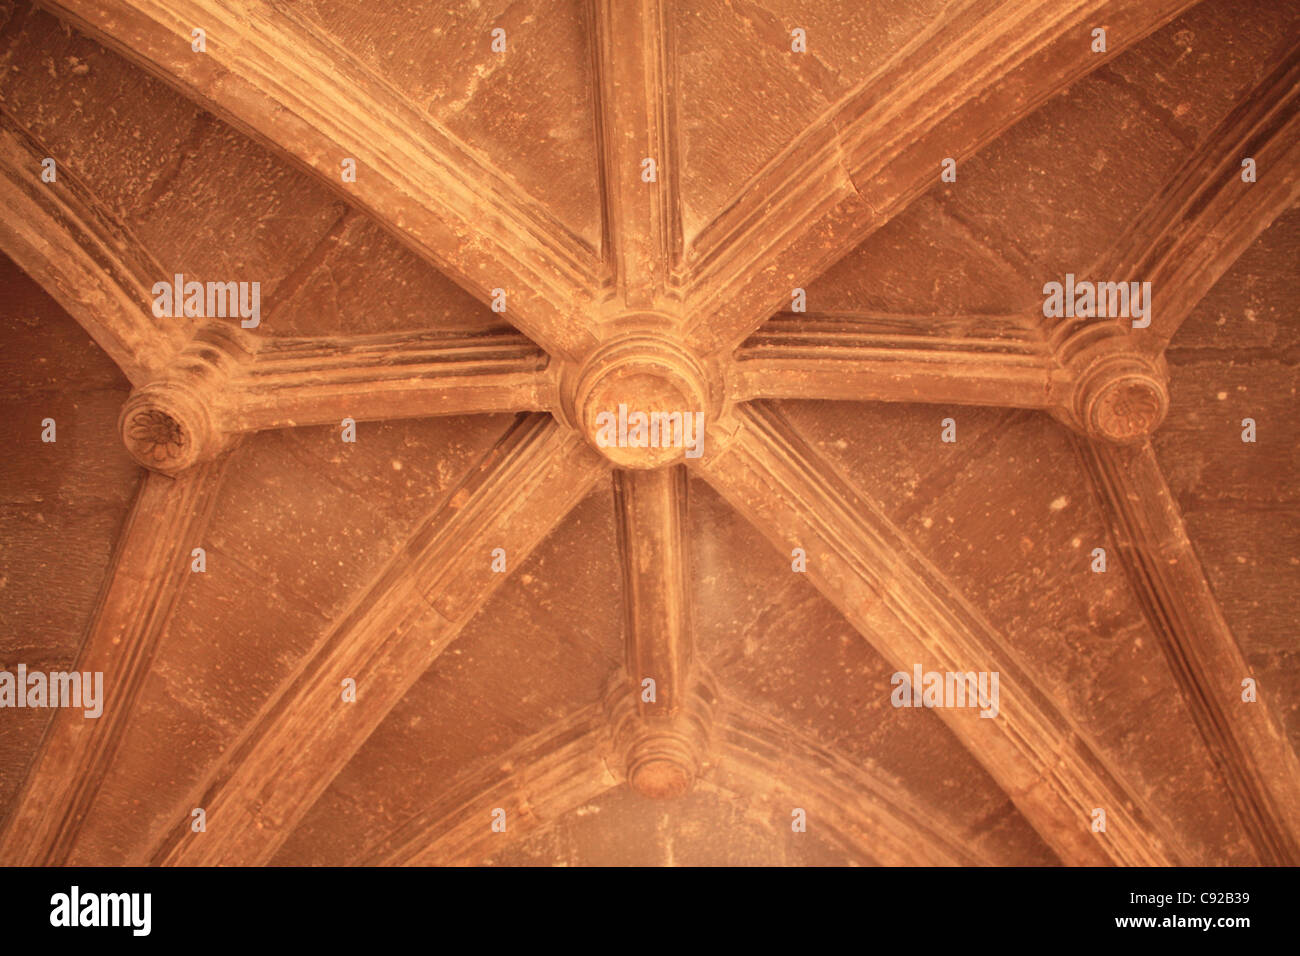 Spain, rib-vaulting on old archway, detail Stock Photo